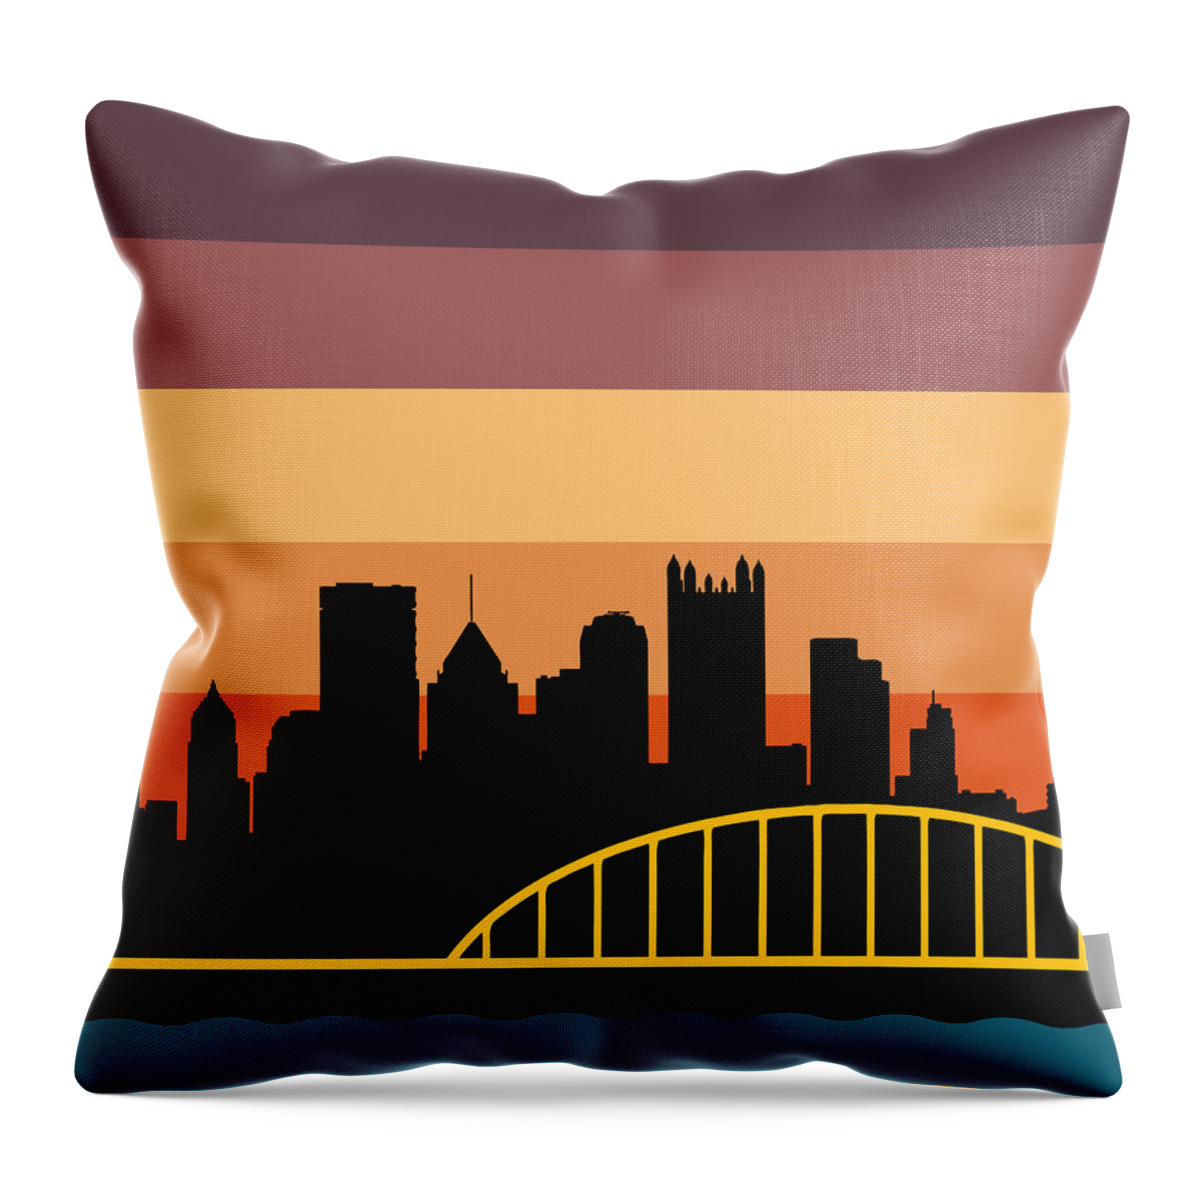  Throw Pillow featuring the digital art Sunset Series Three by Pittsburgh Clothing Co